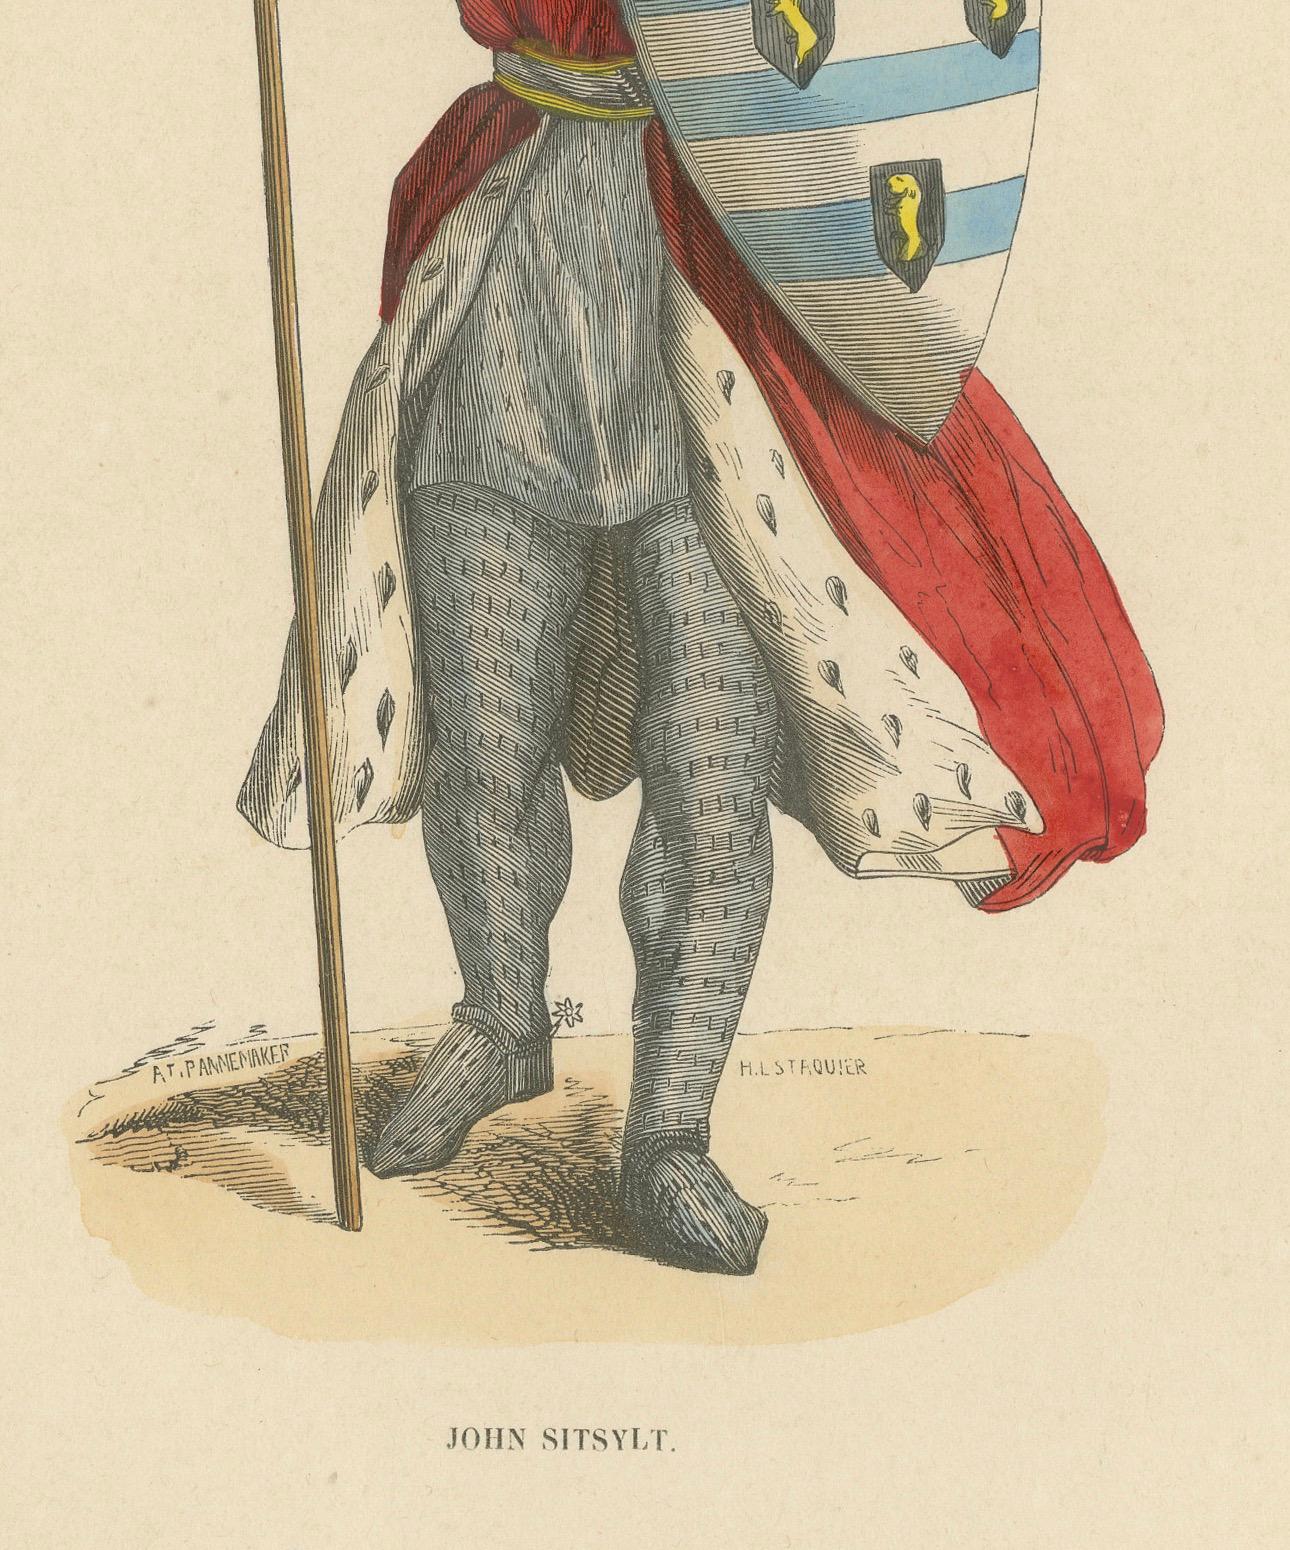 John Sitsylt, the Heraldic Knight in an Original Hand-Colored Lithograph of 1847 For Sale 1